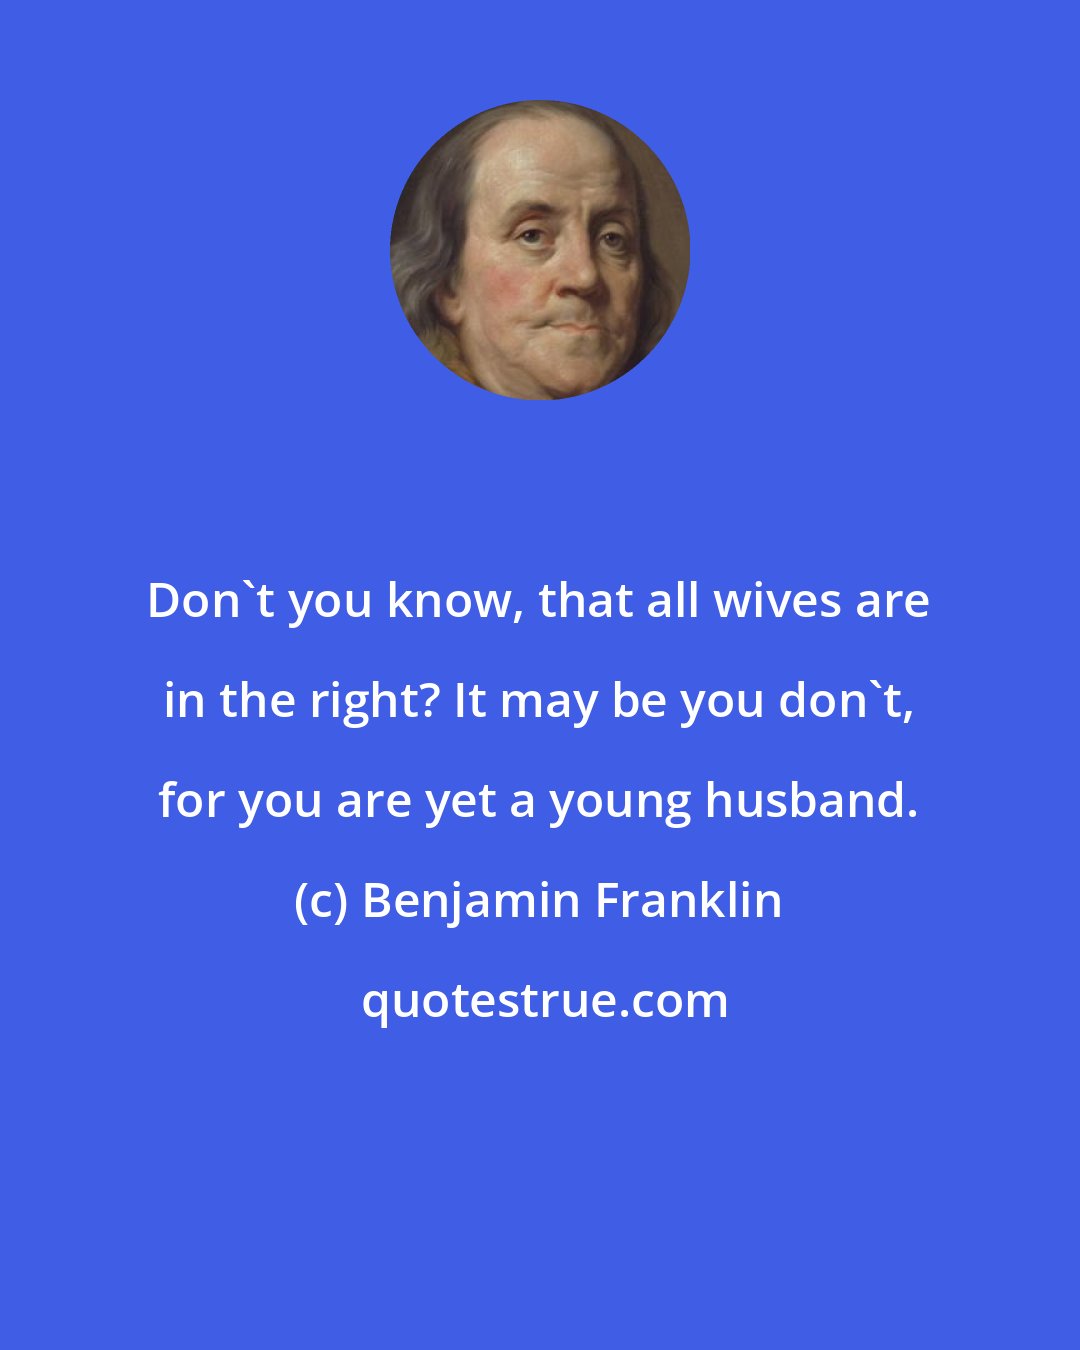 Benjamin Franklin: Don't you know, that all wives are in the right? It may be you don't, for you are yet a young husband.